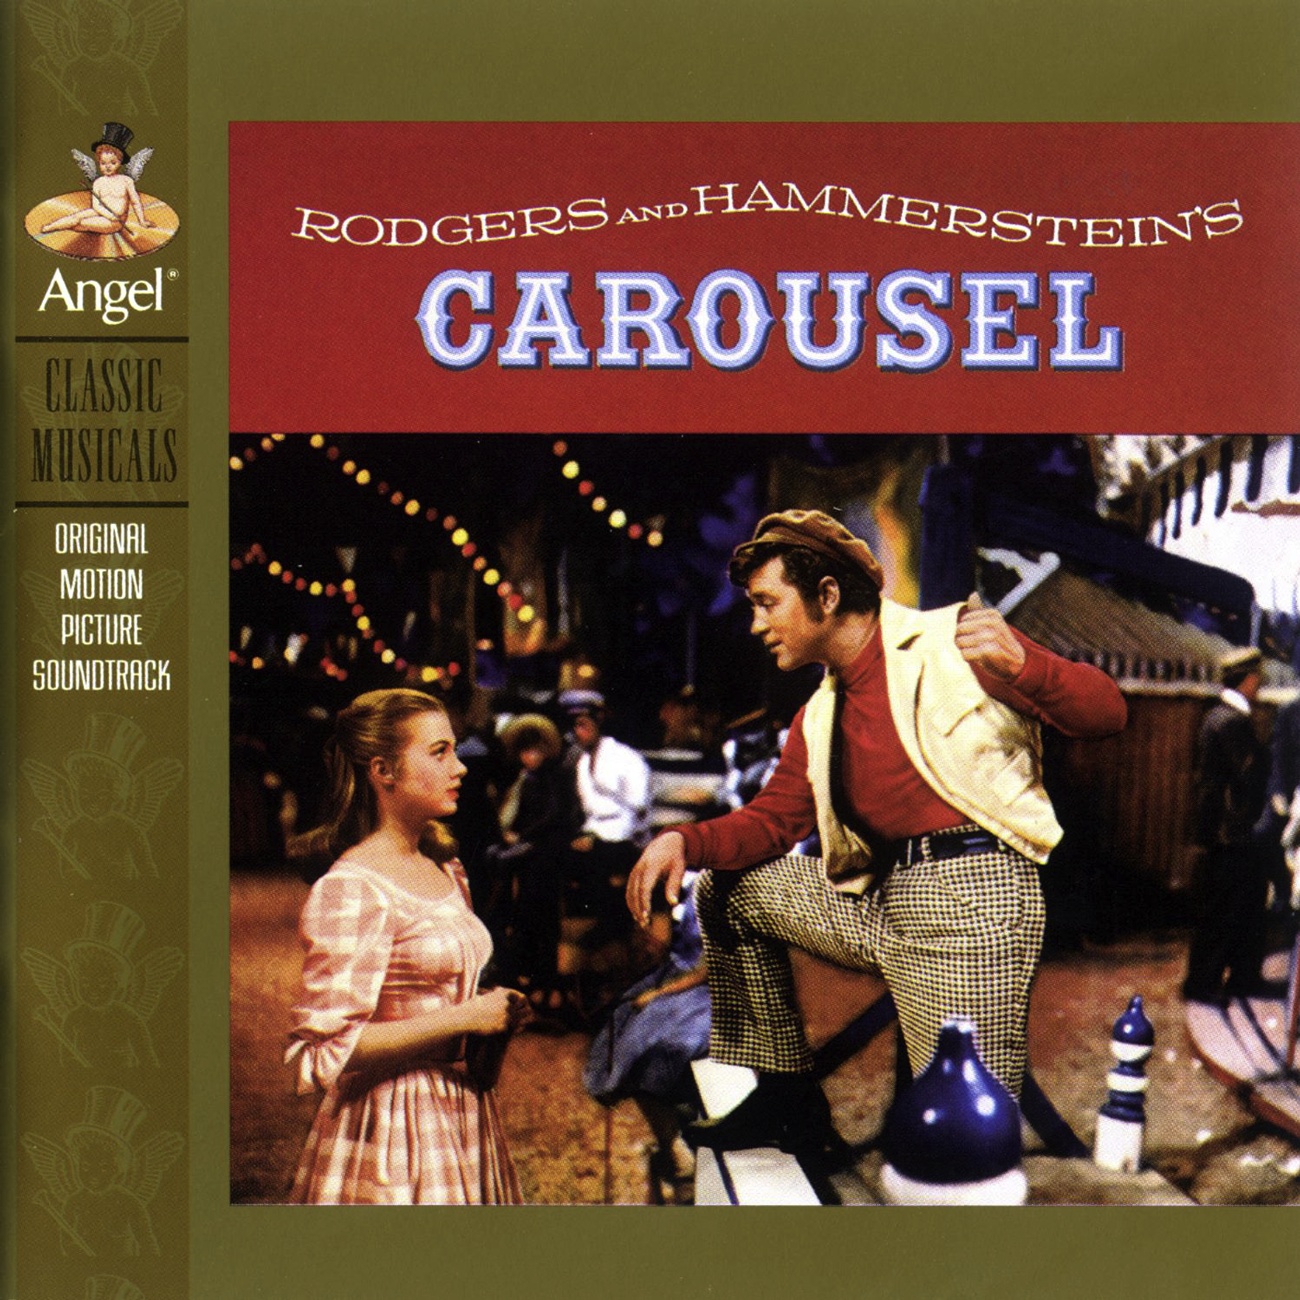 Carousel / Rodgers & Hammerstein's / Original Motion Picture Soundtrack (Expanded Edition)